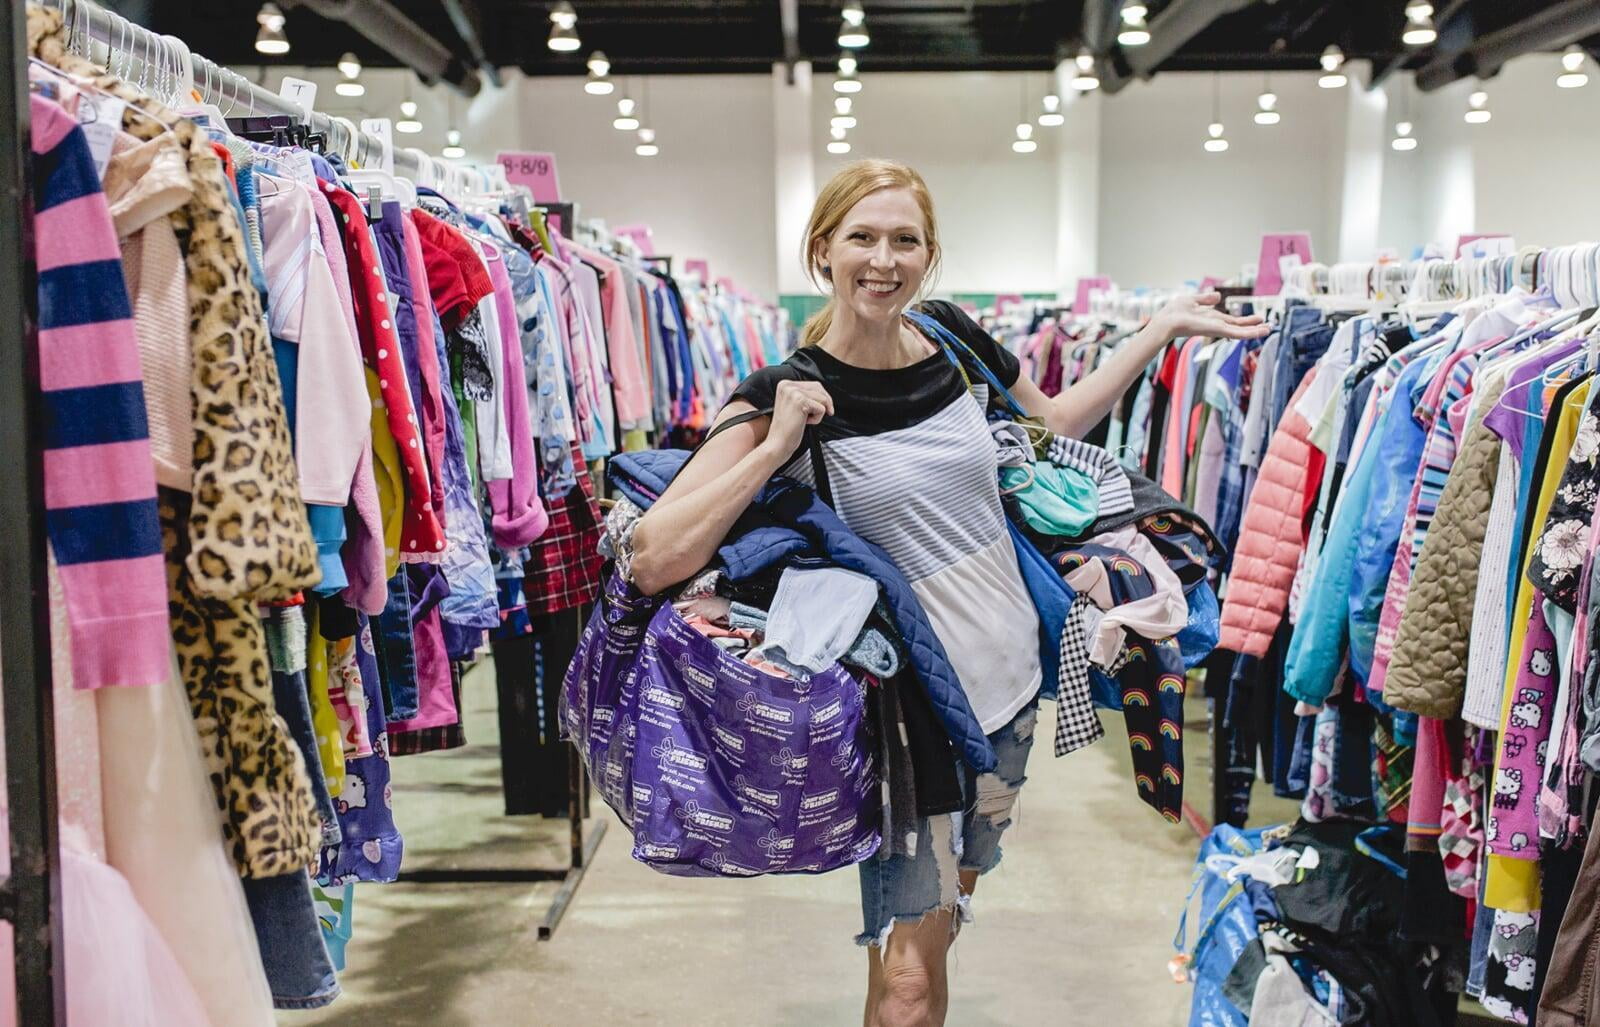 A mom with a large JBF shopping bags on her shoulders stand between clothing racks at JBF!